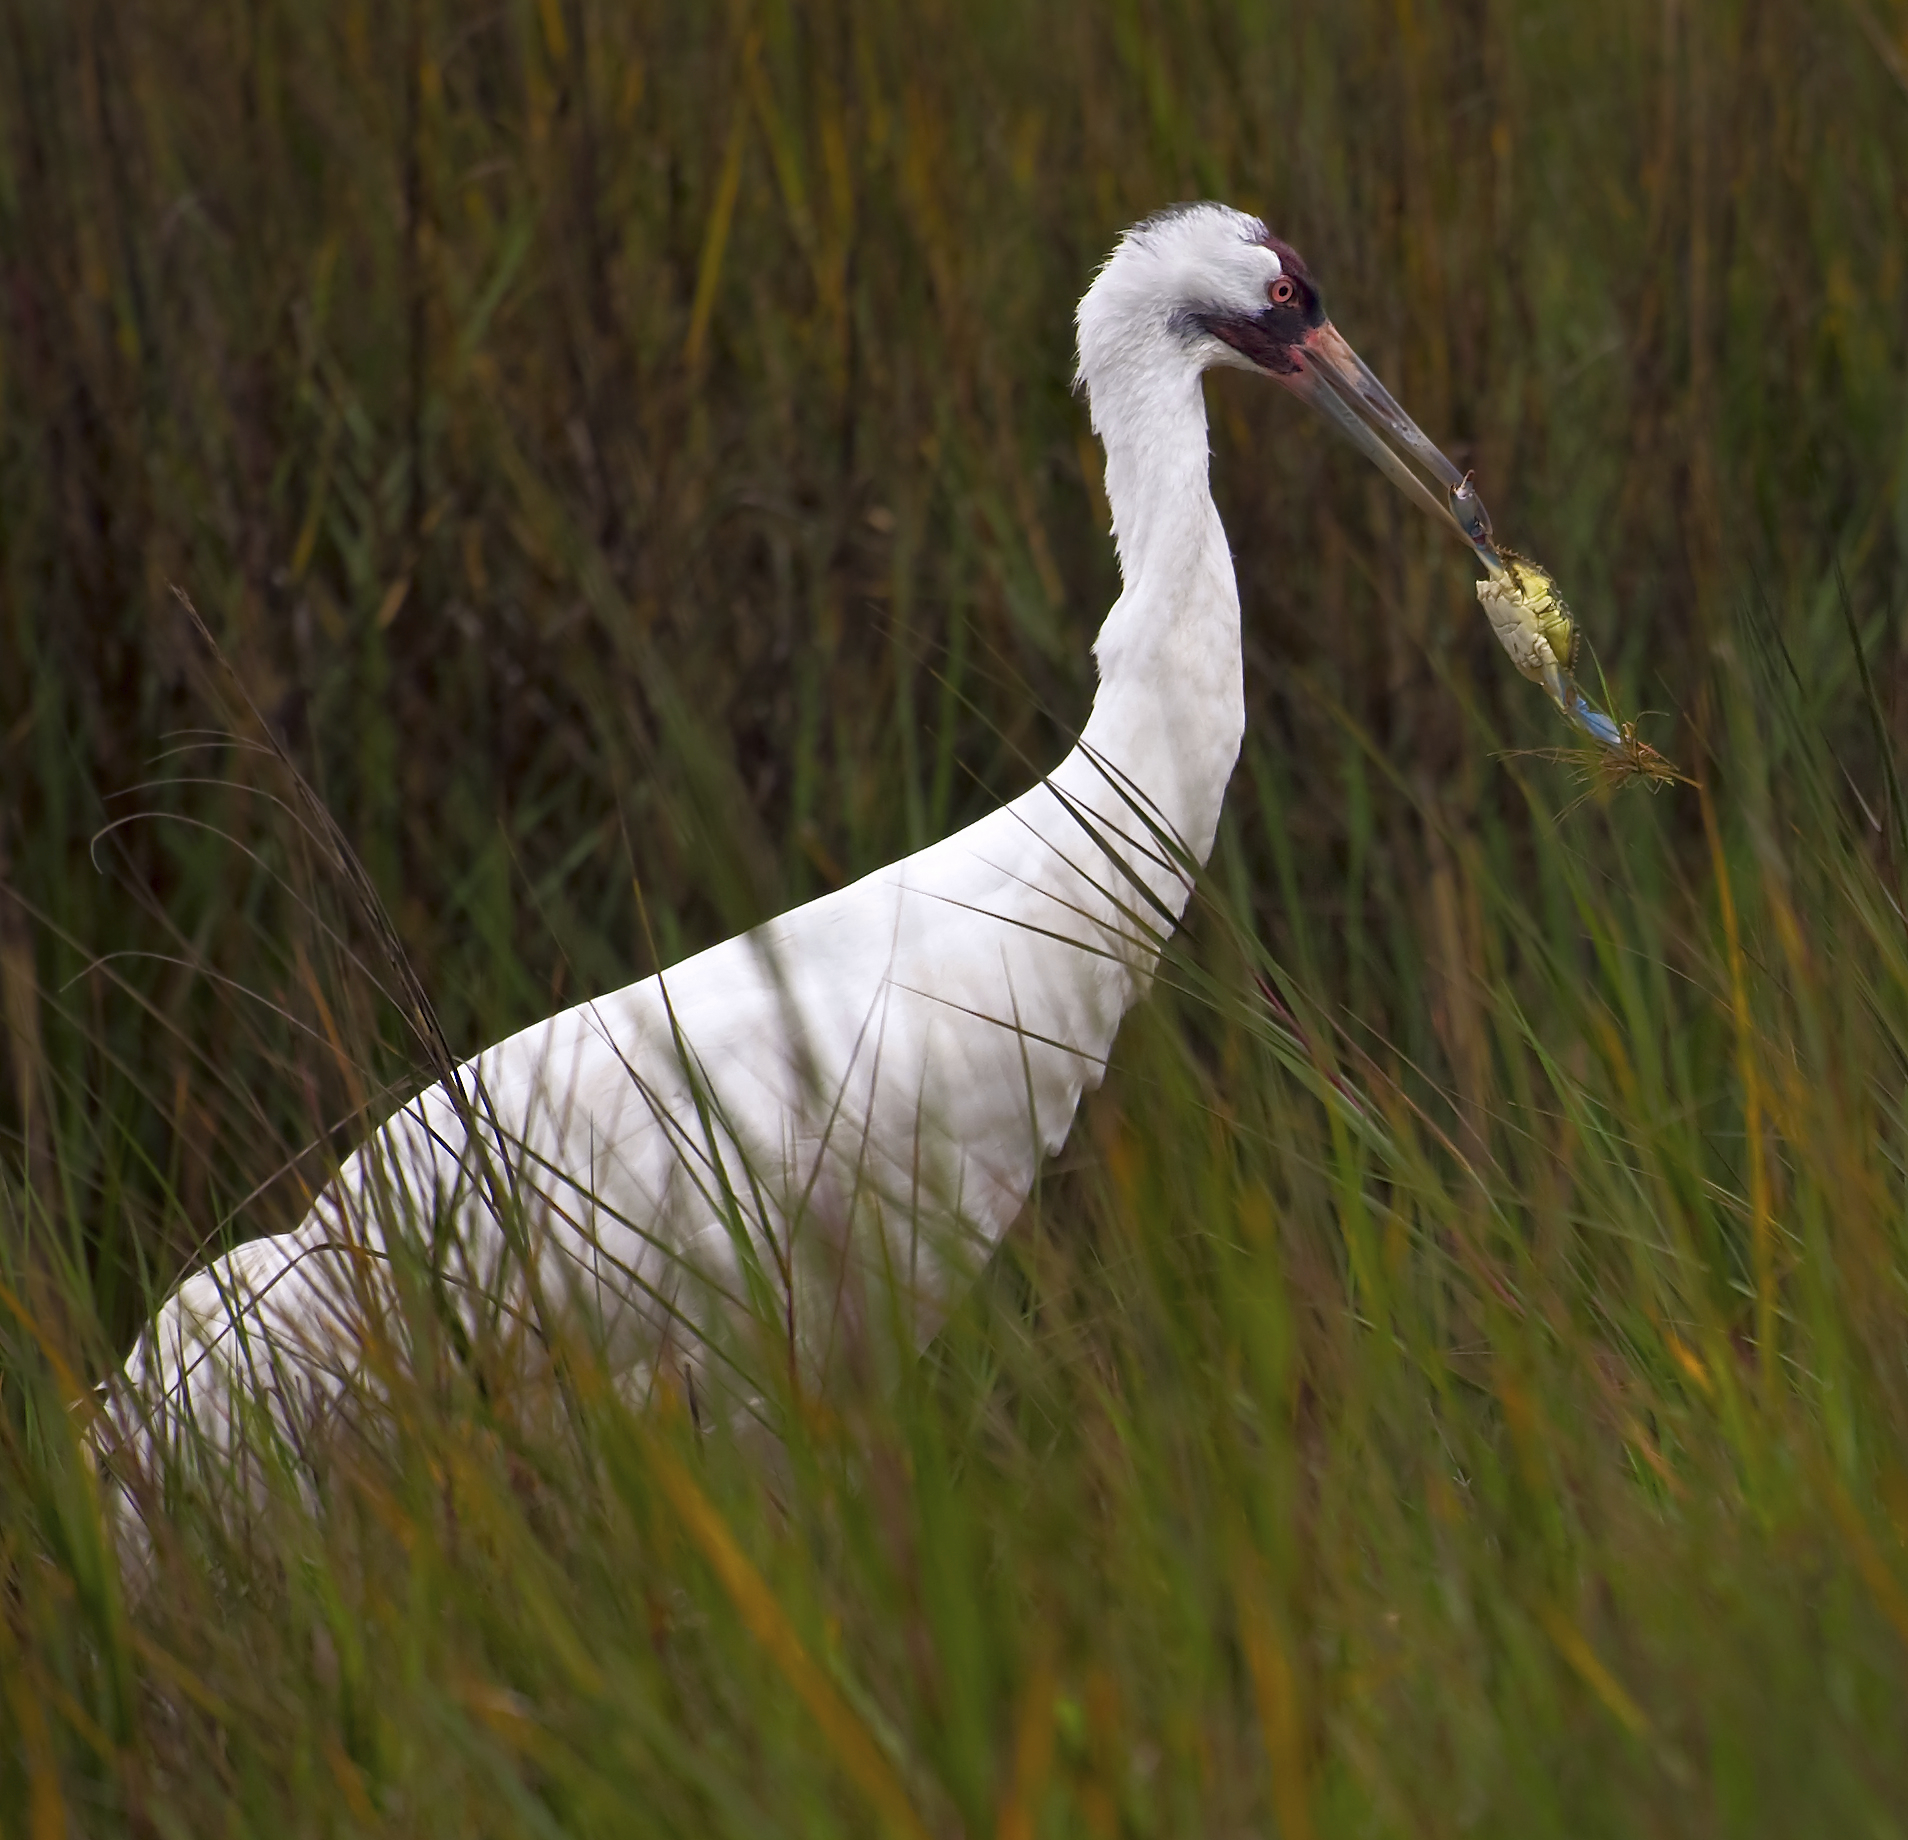 A Whooping Crane with fish in its mouth